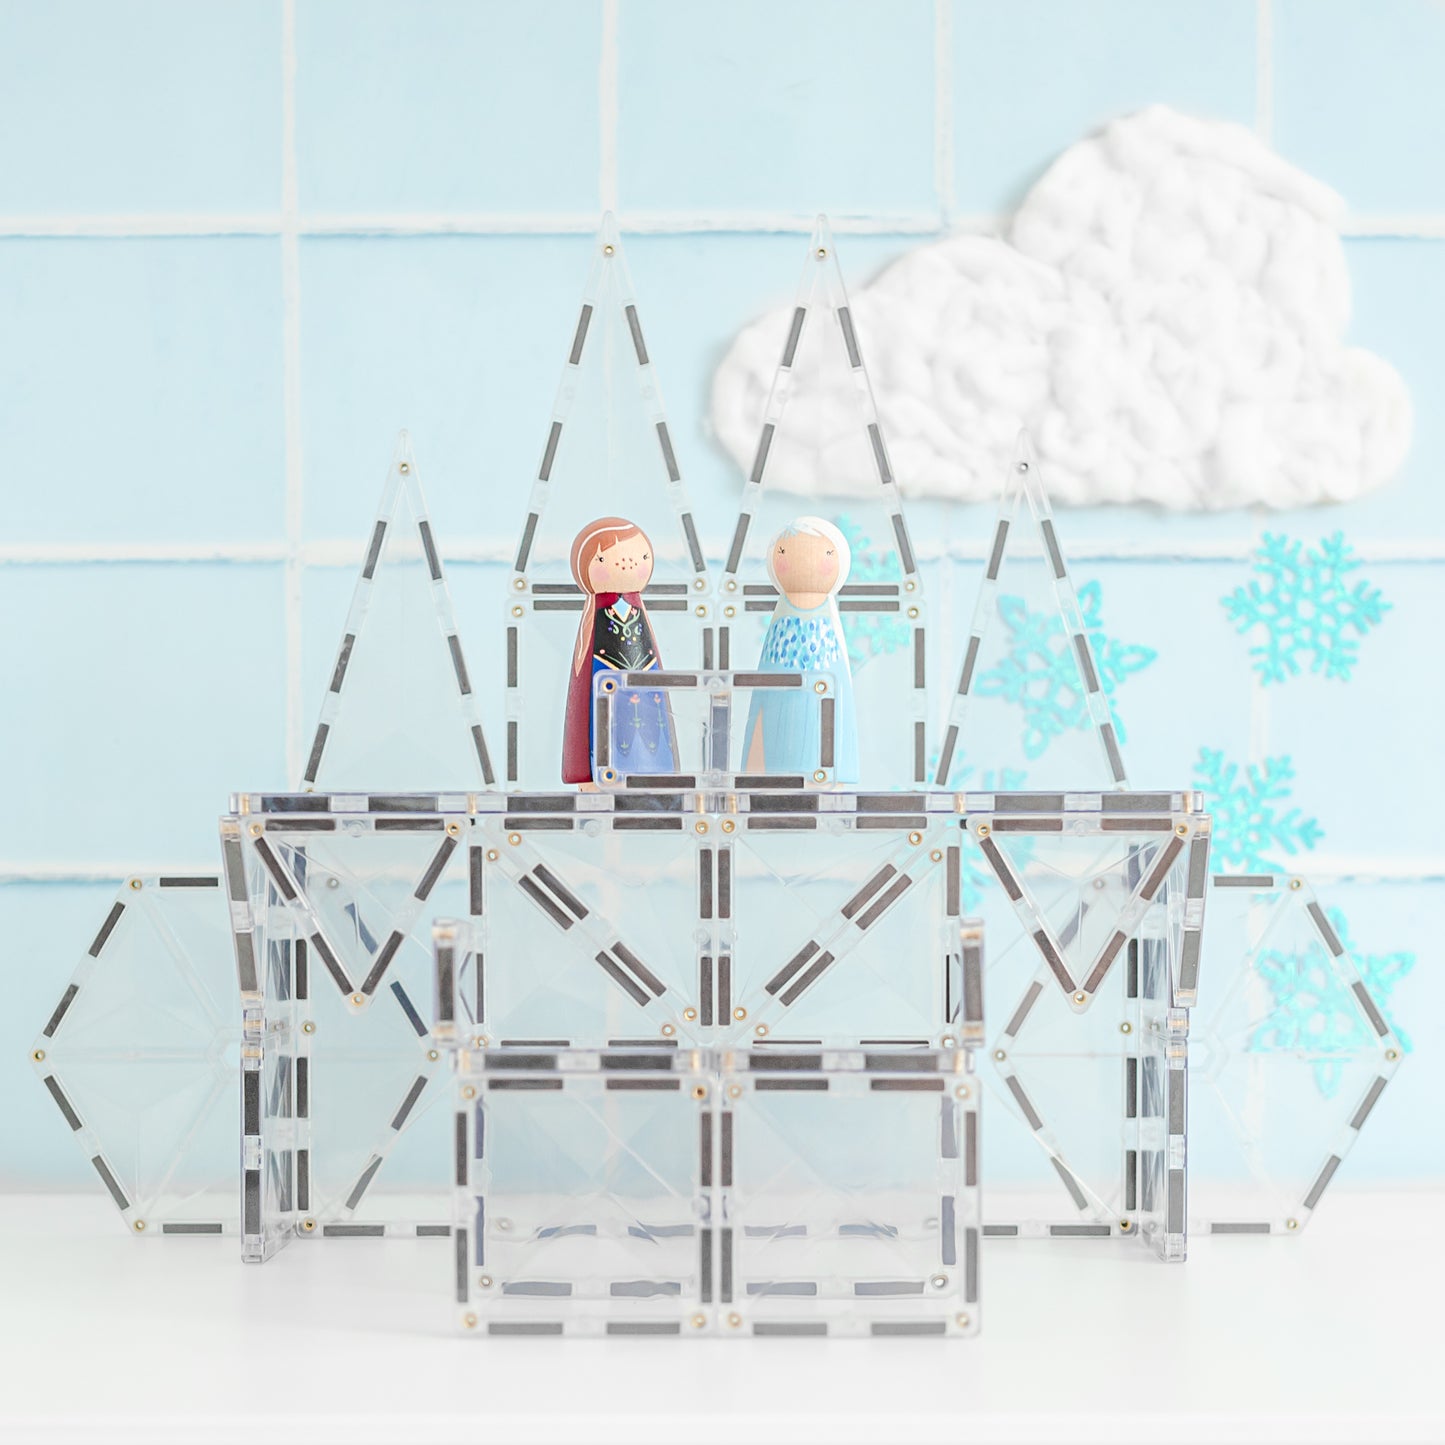 Connetix - 34 Piece Clear Starter Pack Magnetic Tiles